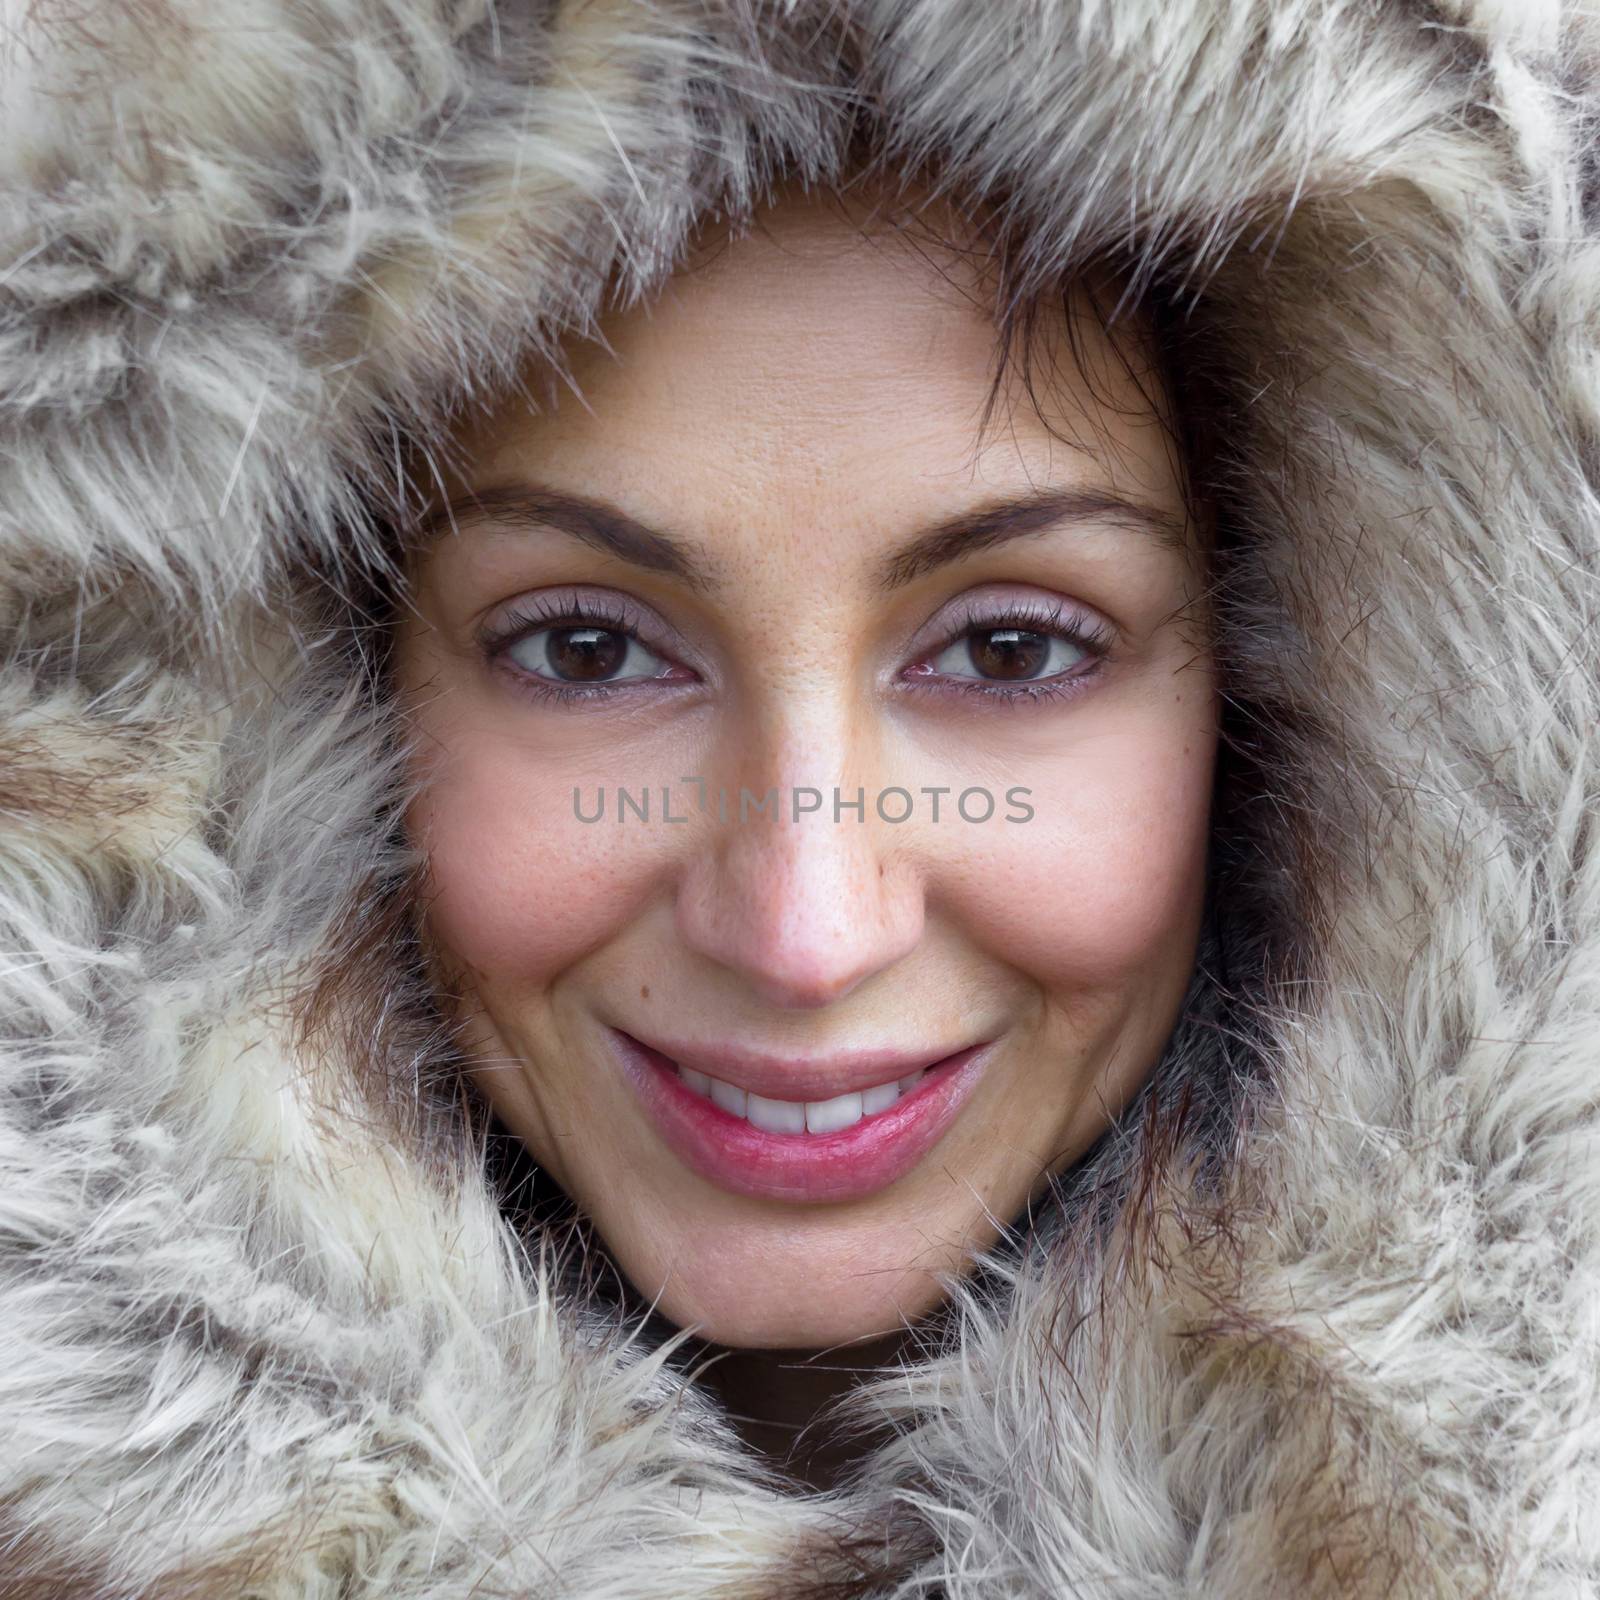 Closeup portrait of cute woman wearing warm coat with hood with fur, having fun in winter park, wintertime fashionable style, vacation concept.